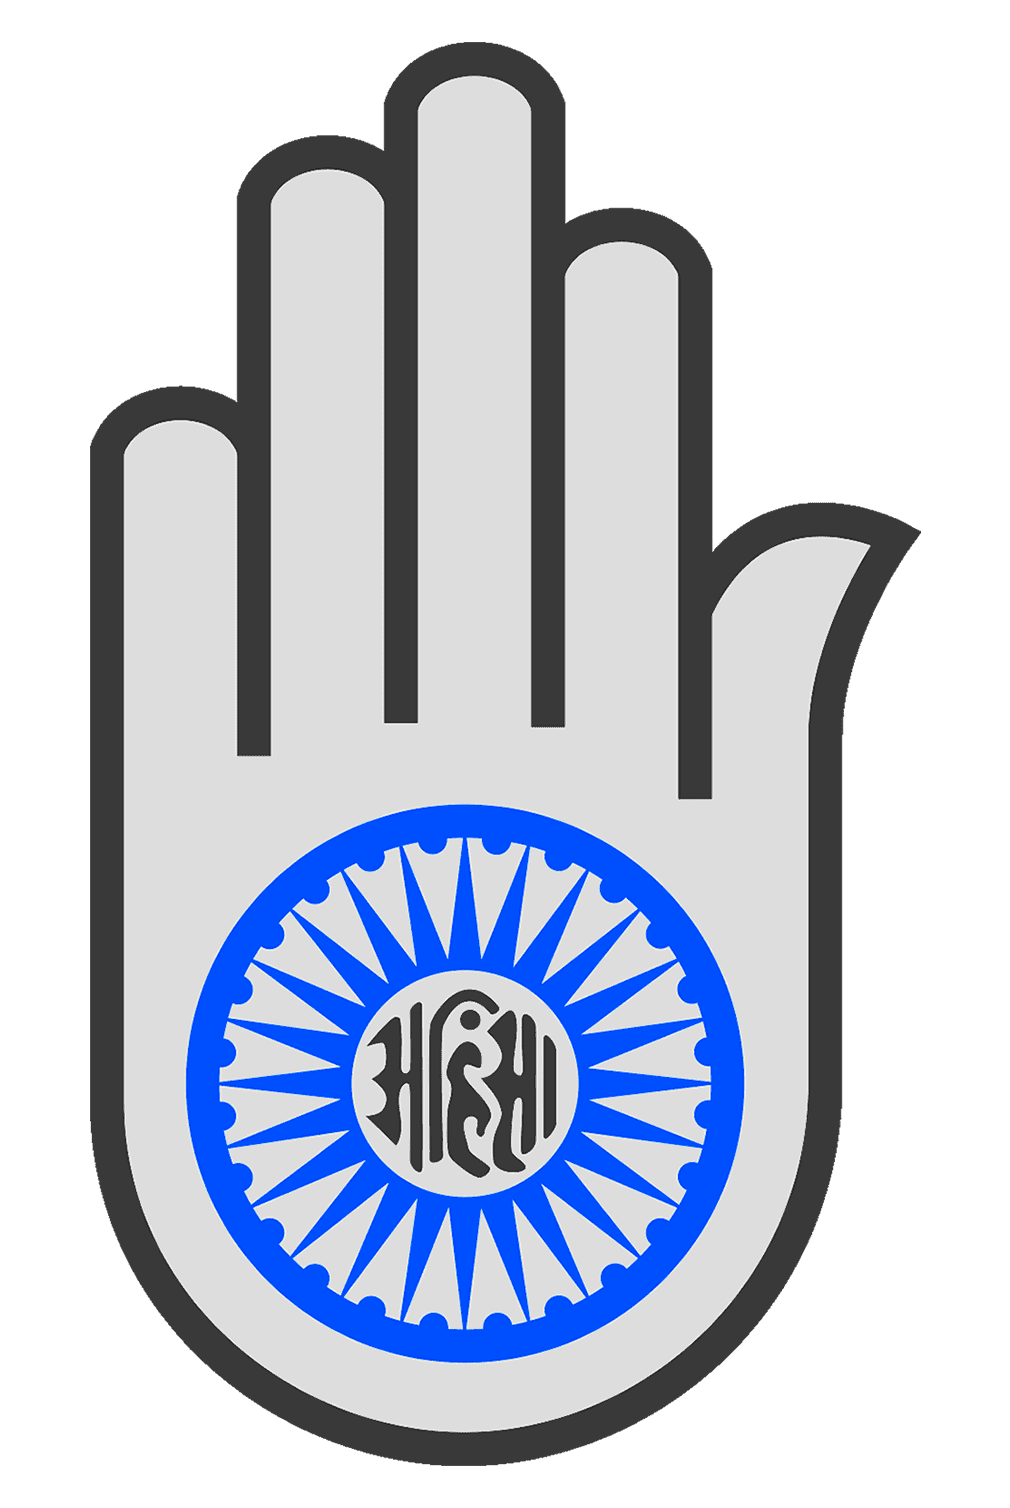 Helping Hands Logo Png Transparent PNG - 500x440 - Free Download on NicePNG